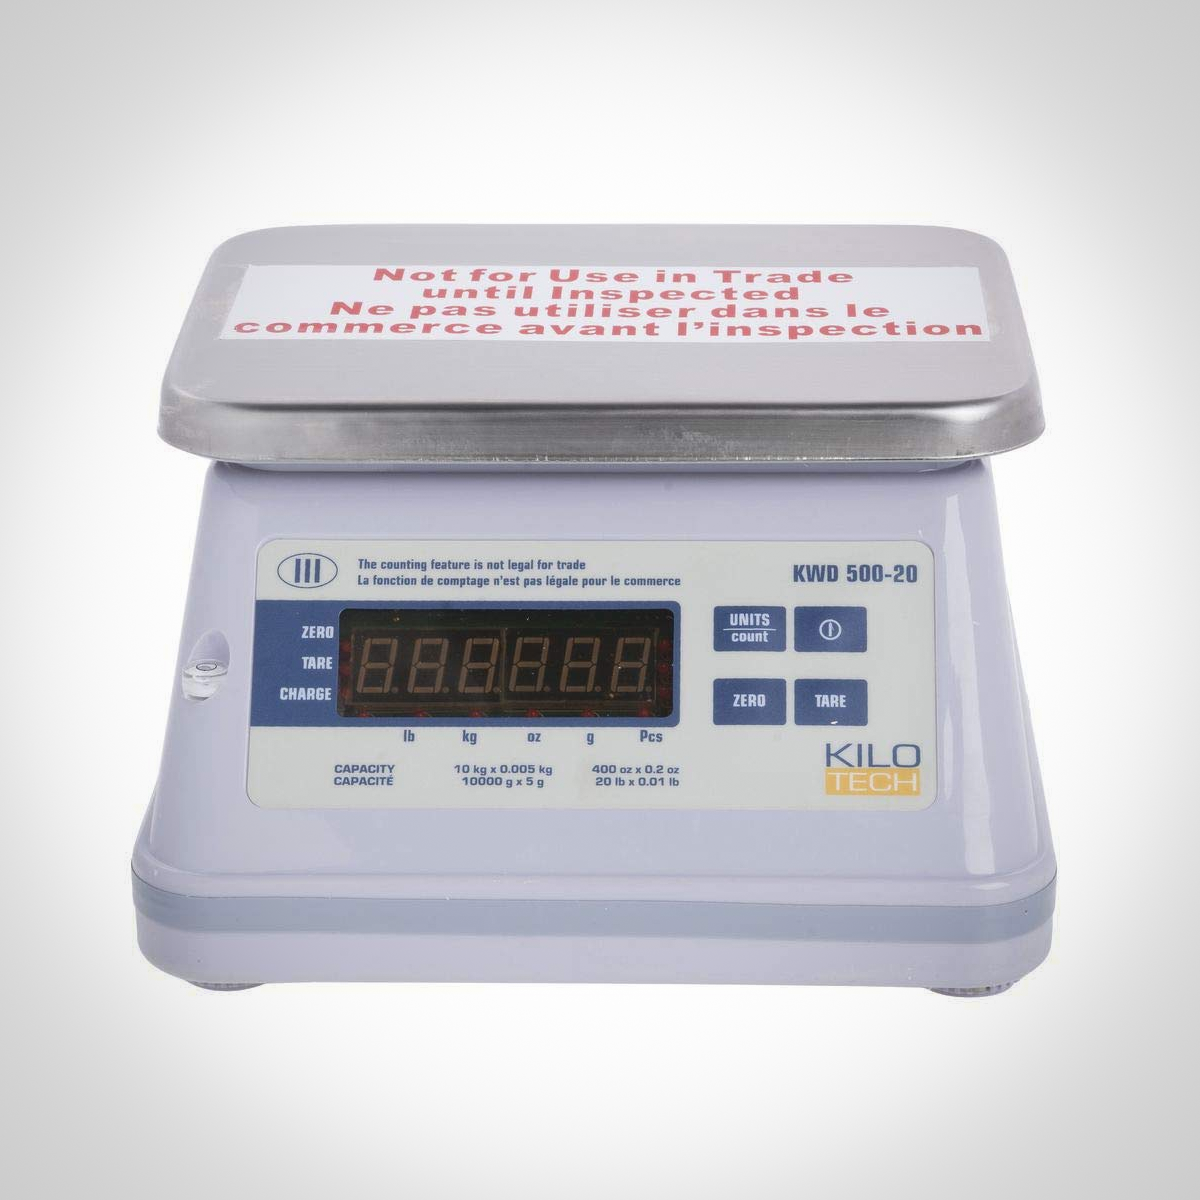 https://www.ontariolaundry.com/wp-content/uploads/2020/11/Kilotech-Laundry-Scales-Hero.png